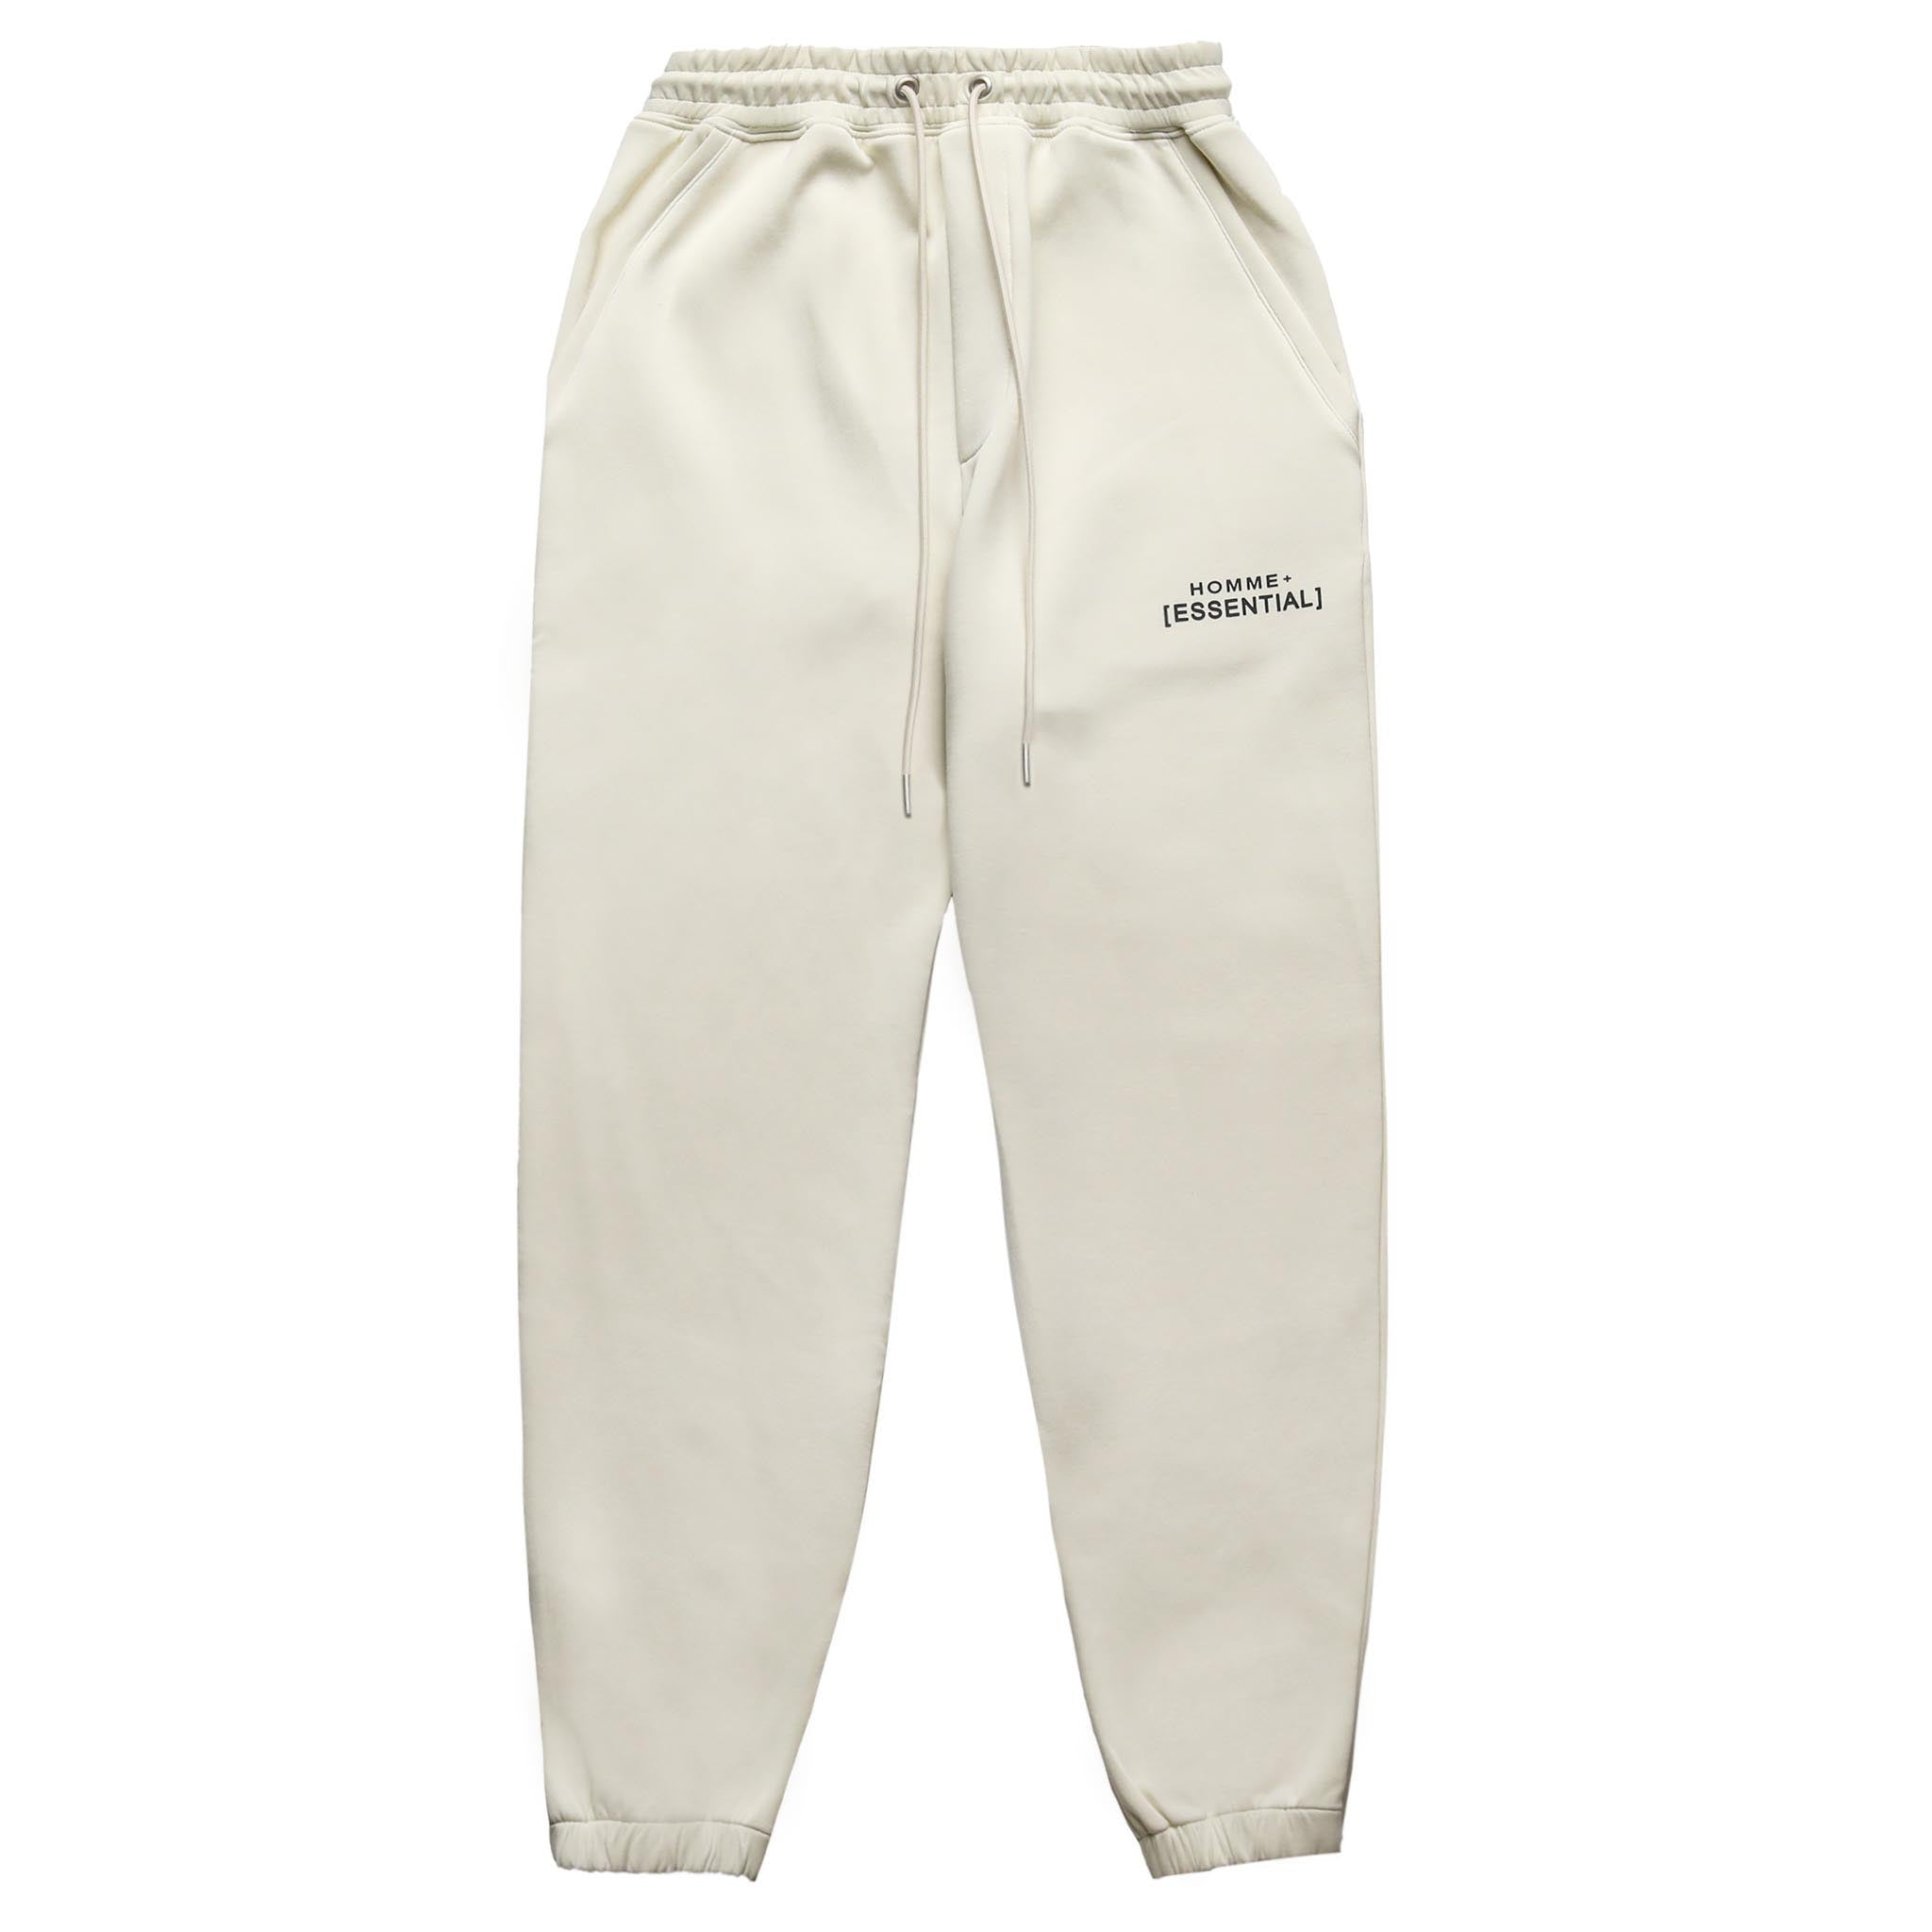 HOMME+ 'ESSENTIAL' Dropcrotch Jogger Off White